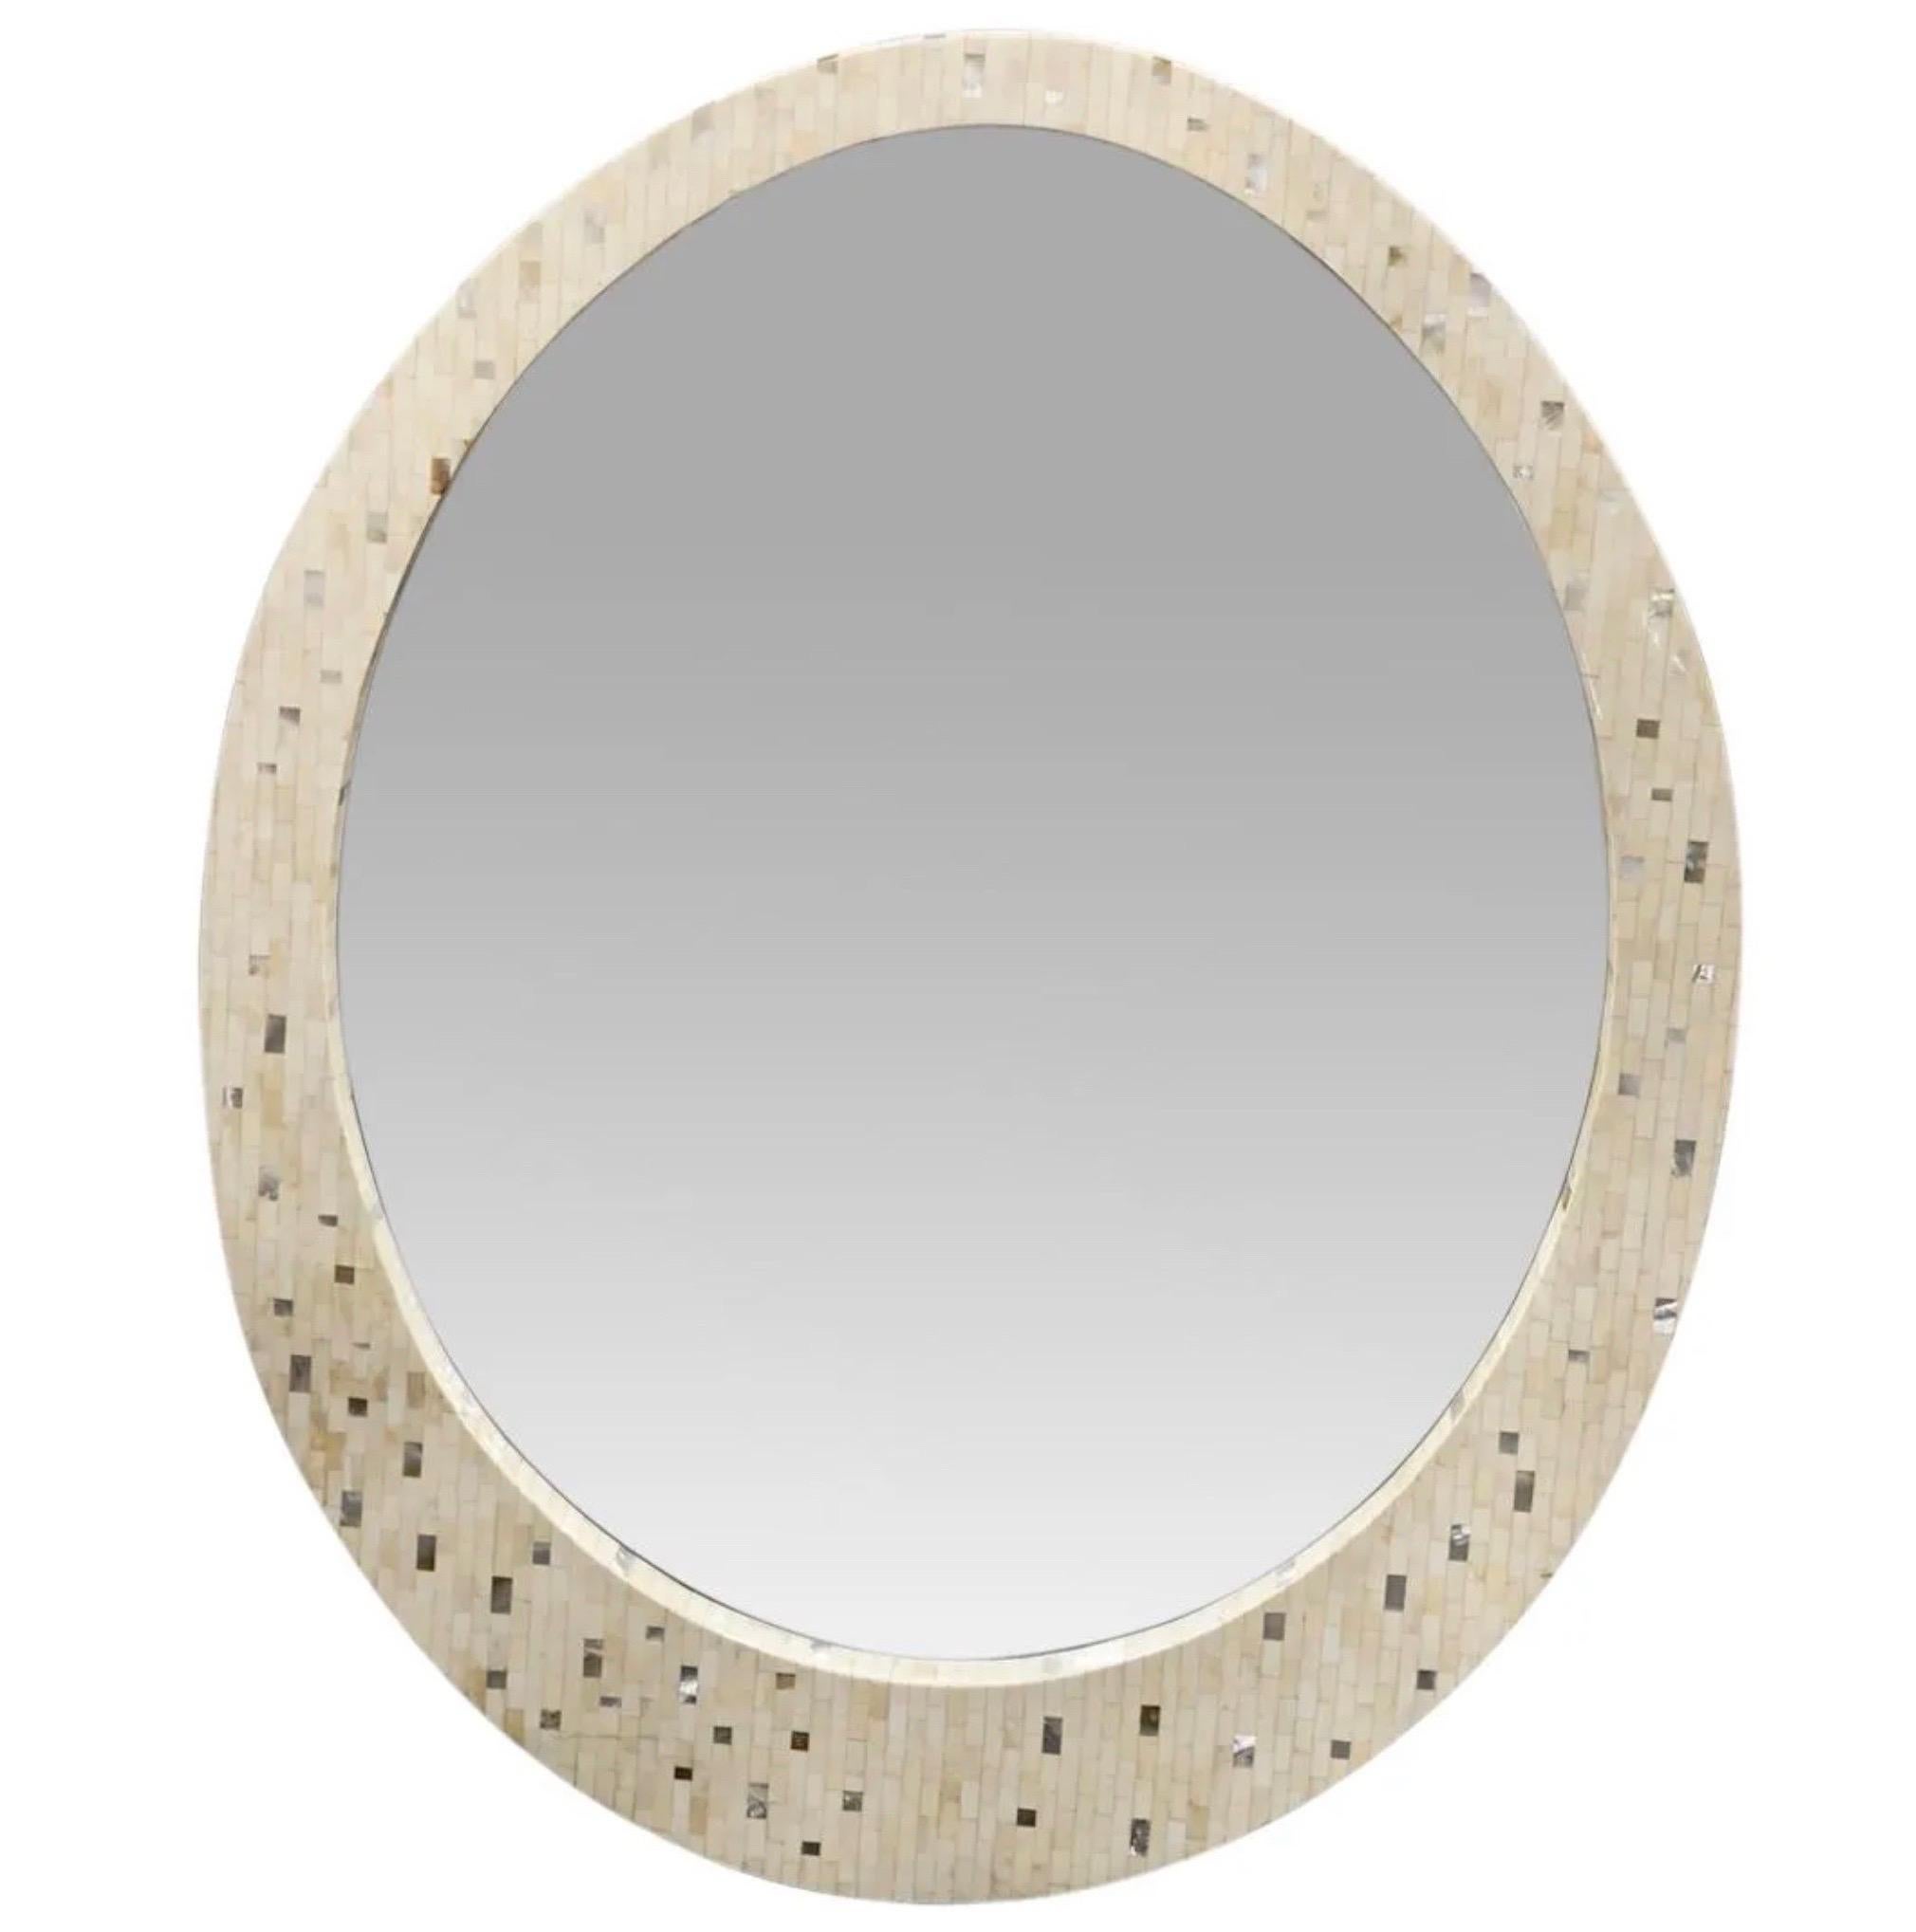 Ron Seff egg formed bone and mother of pearl inlaid mirror.